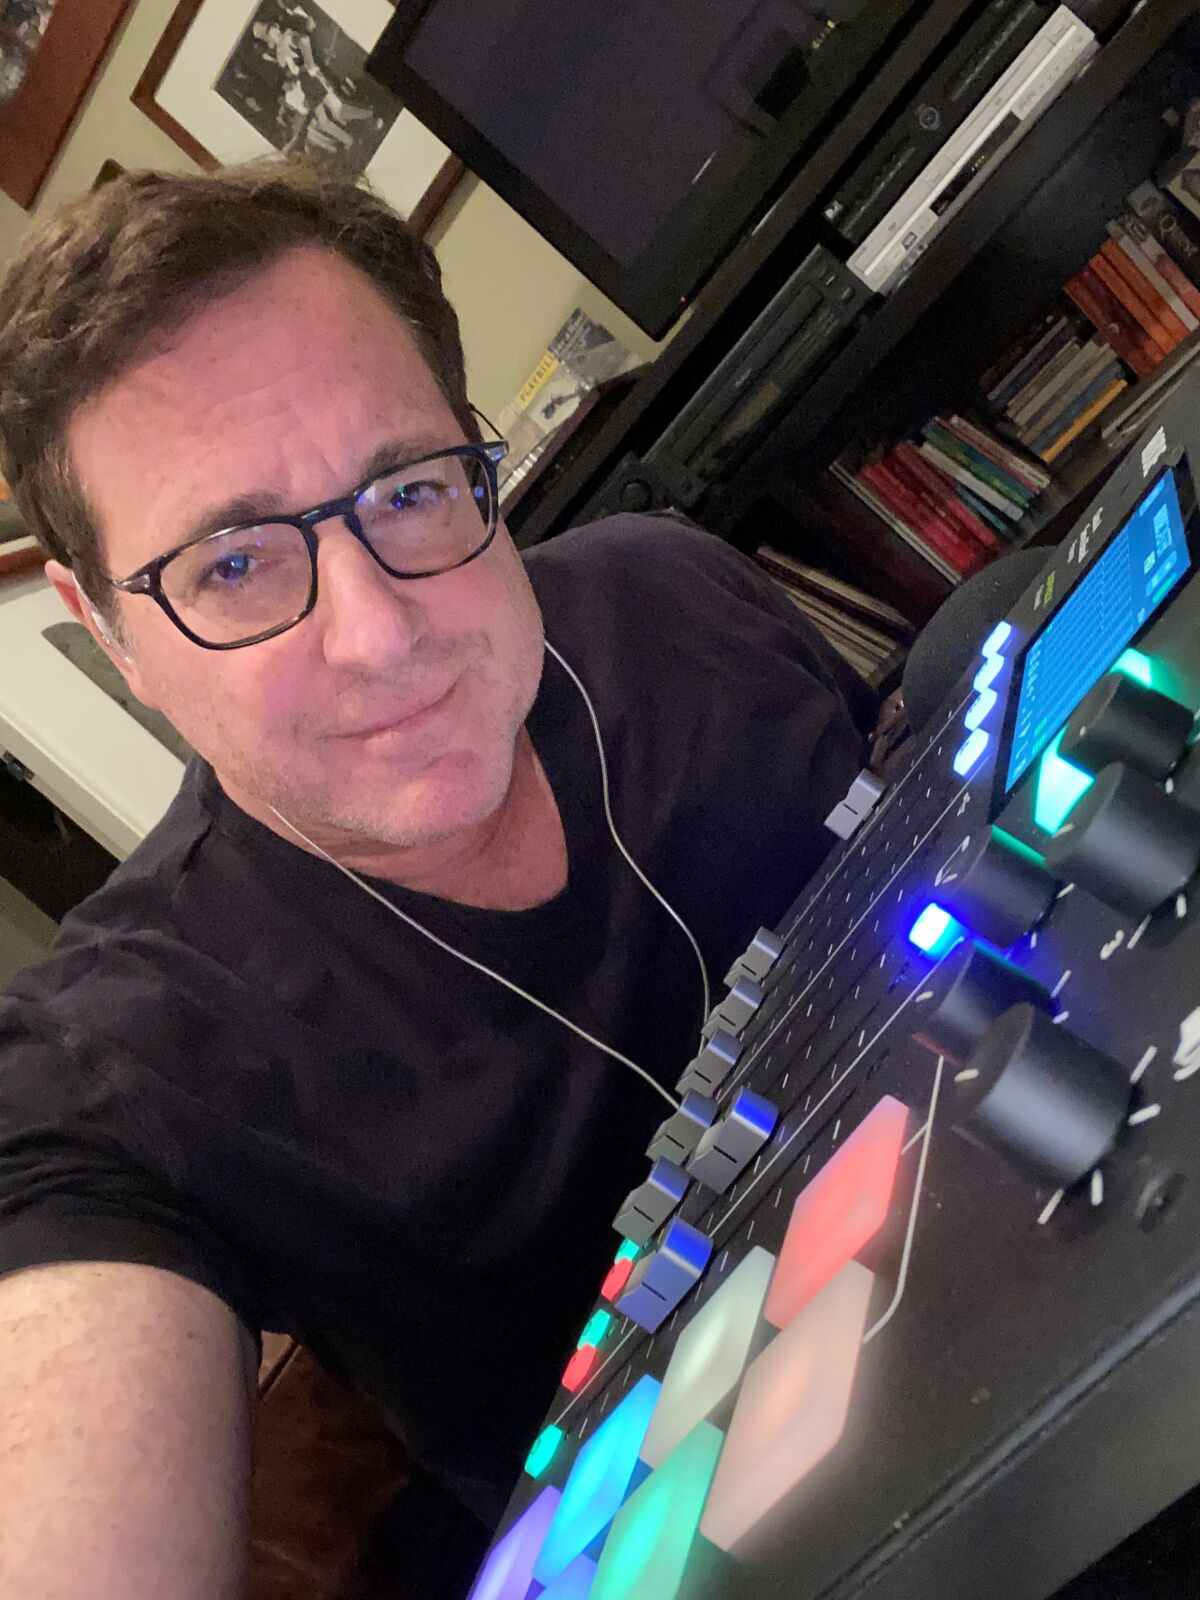 Bob Saget records his new podcast, "Bob Saget's Here for You," from home.